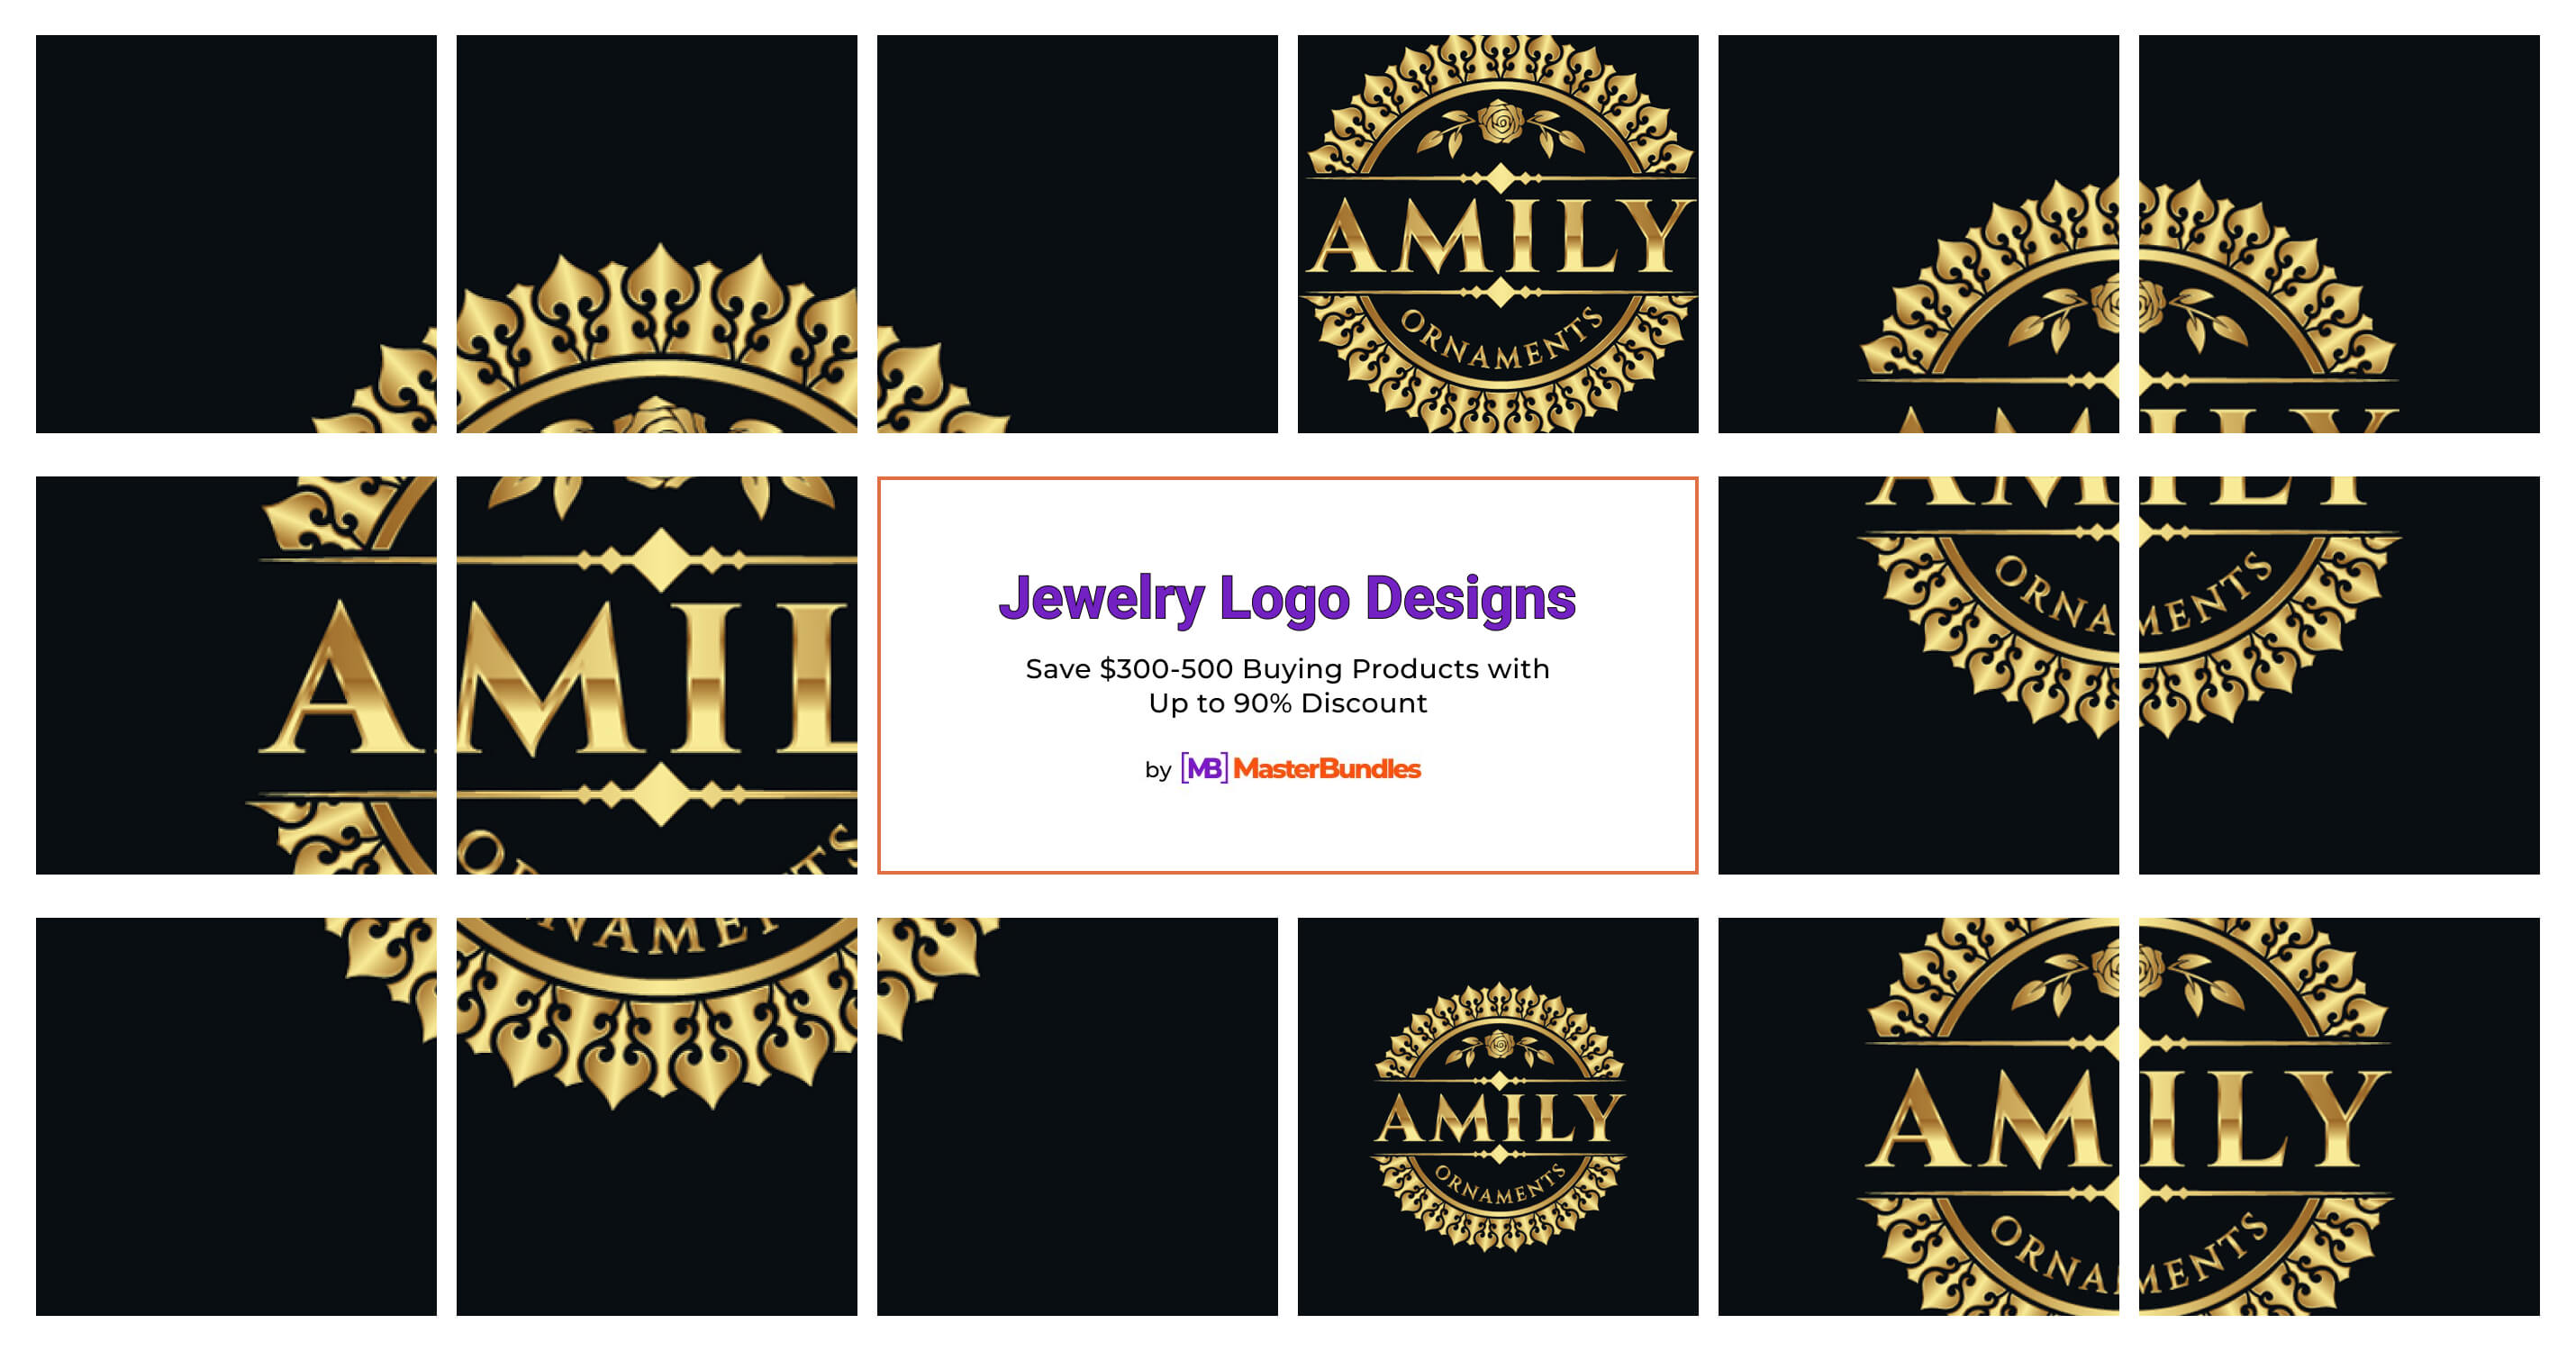 Jewelry Logo Photos and Images